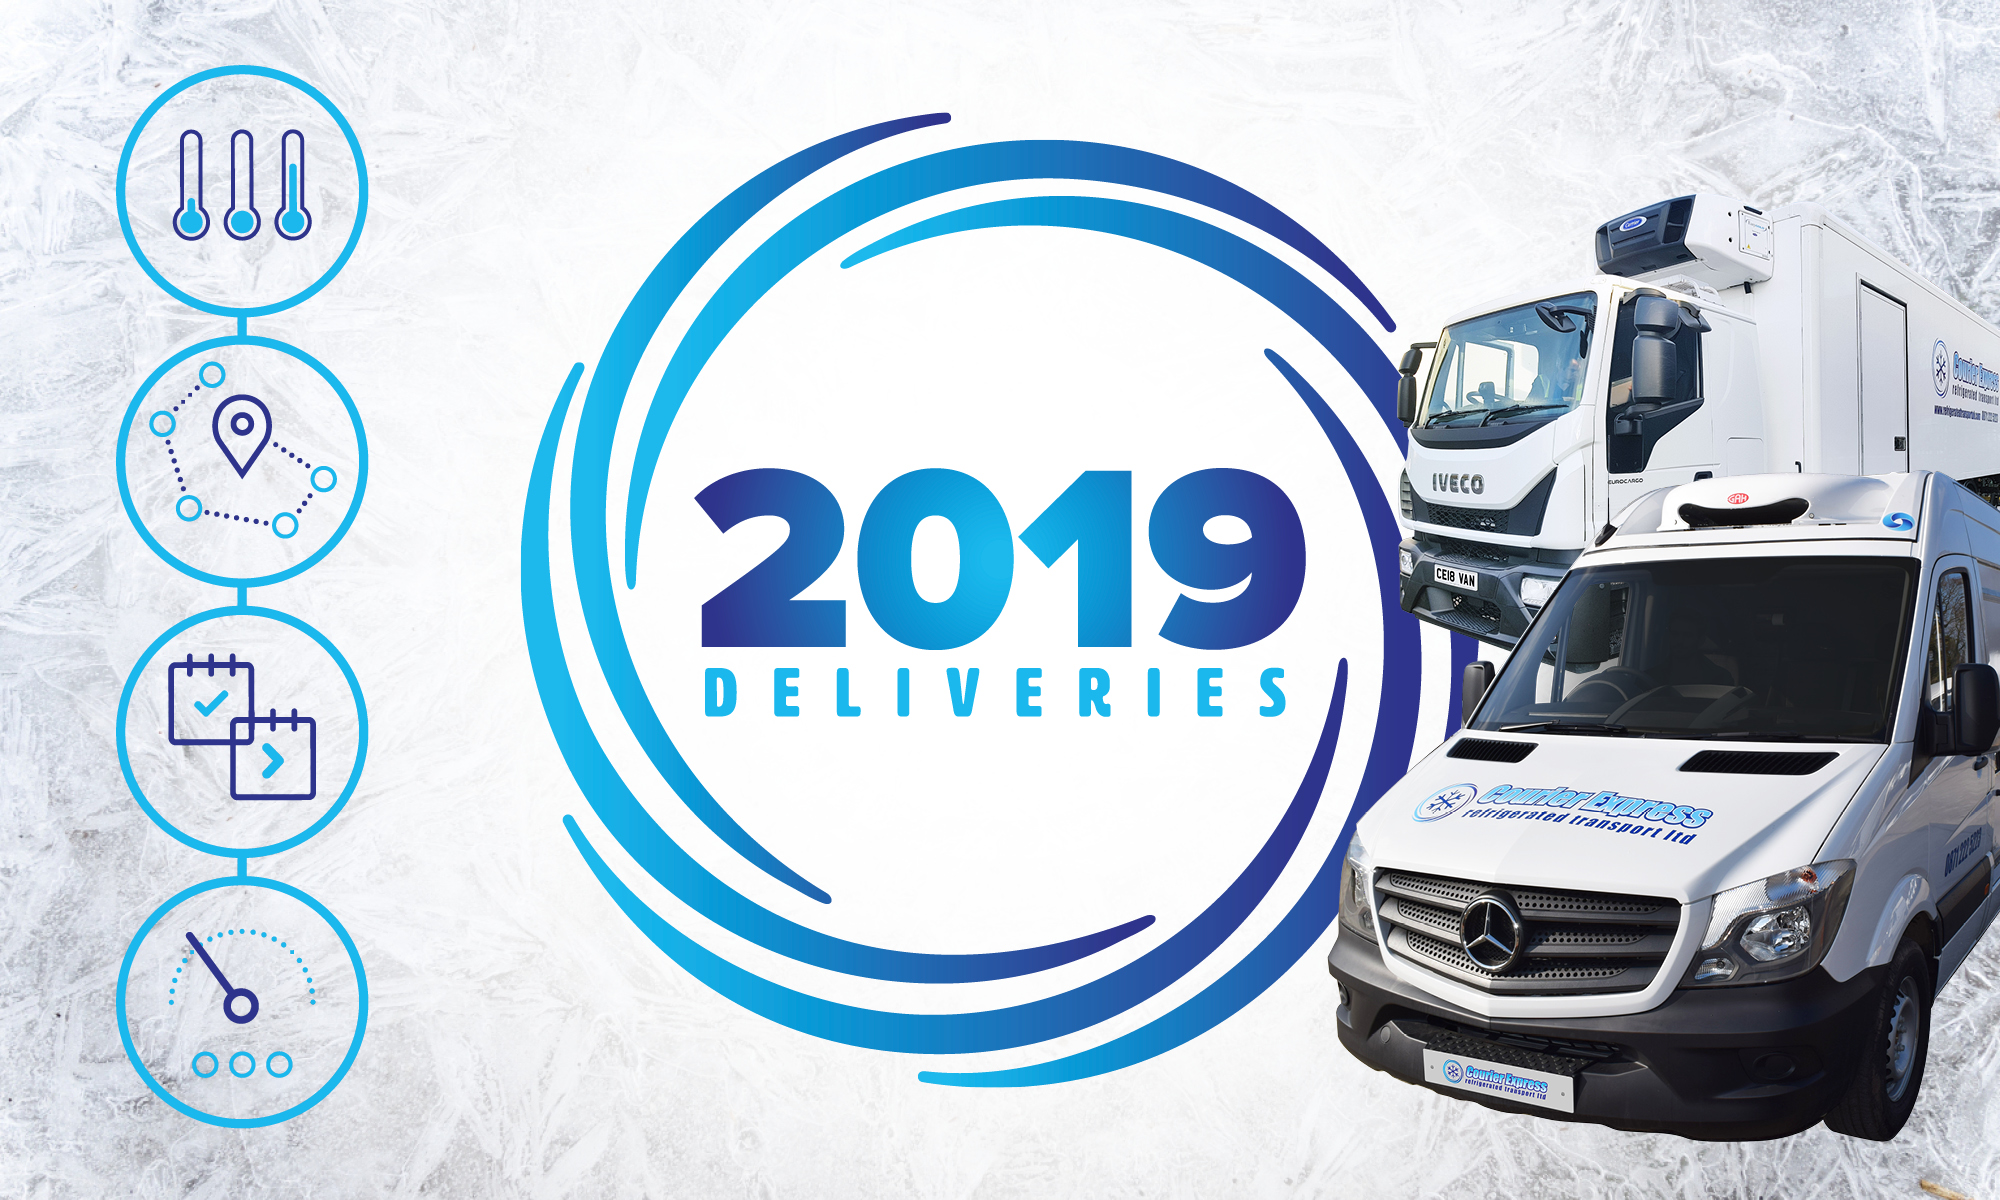 Courier Express 2019 deliveries